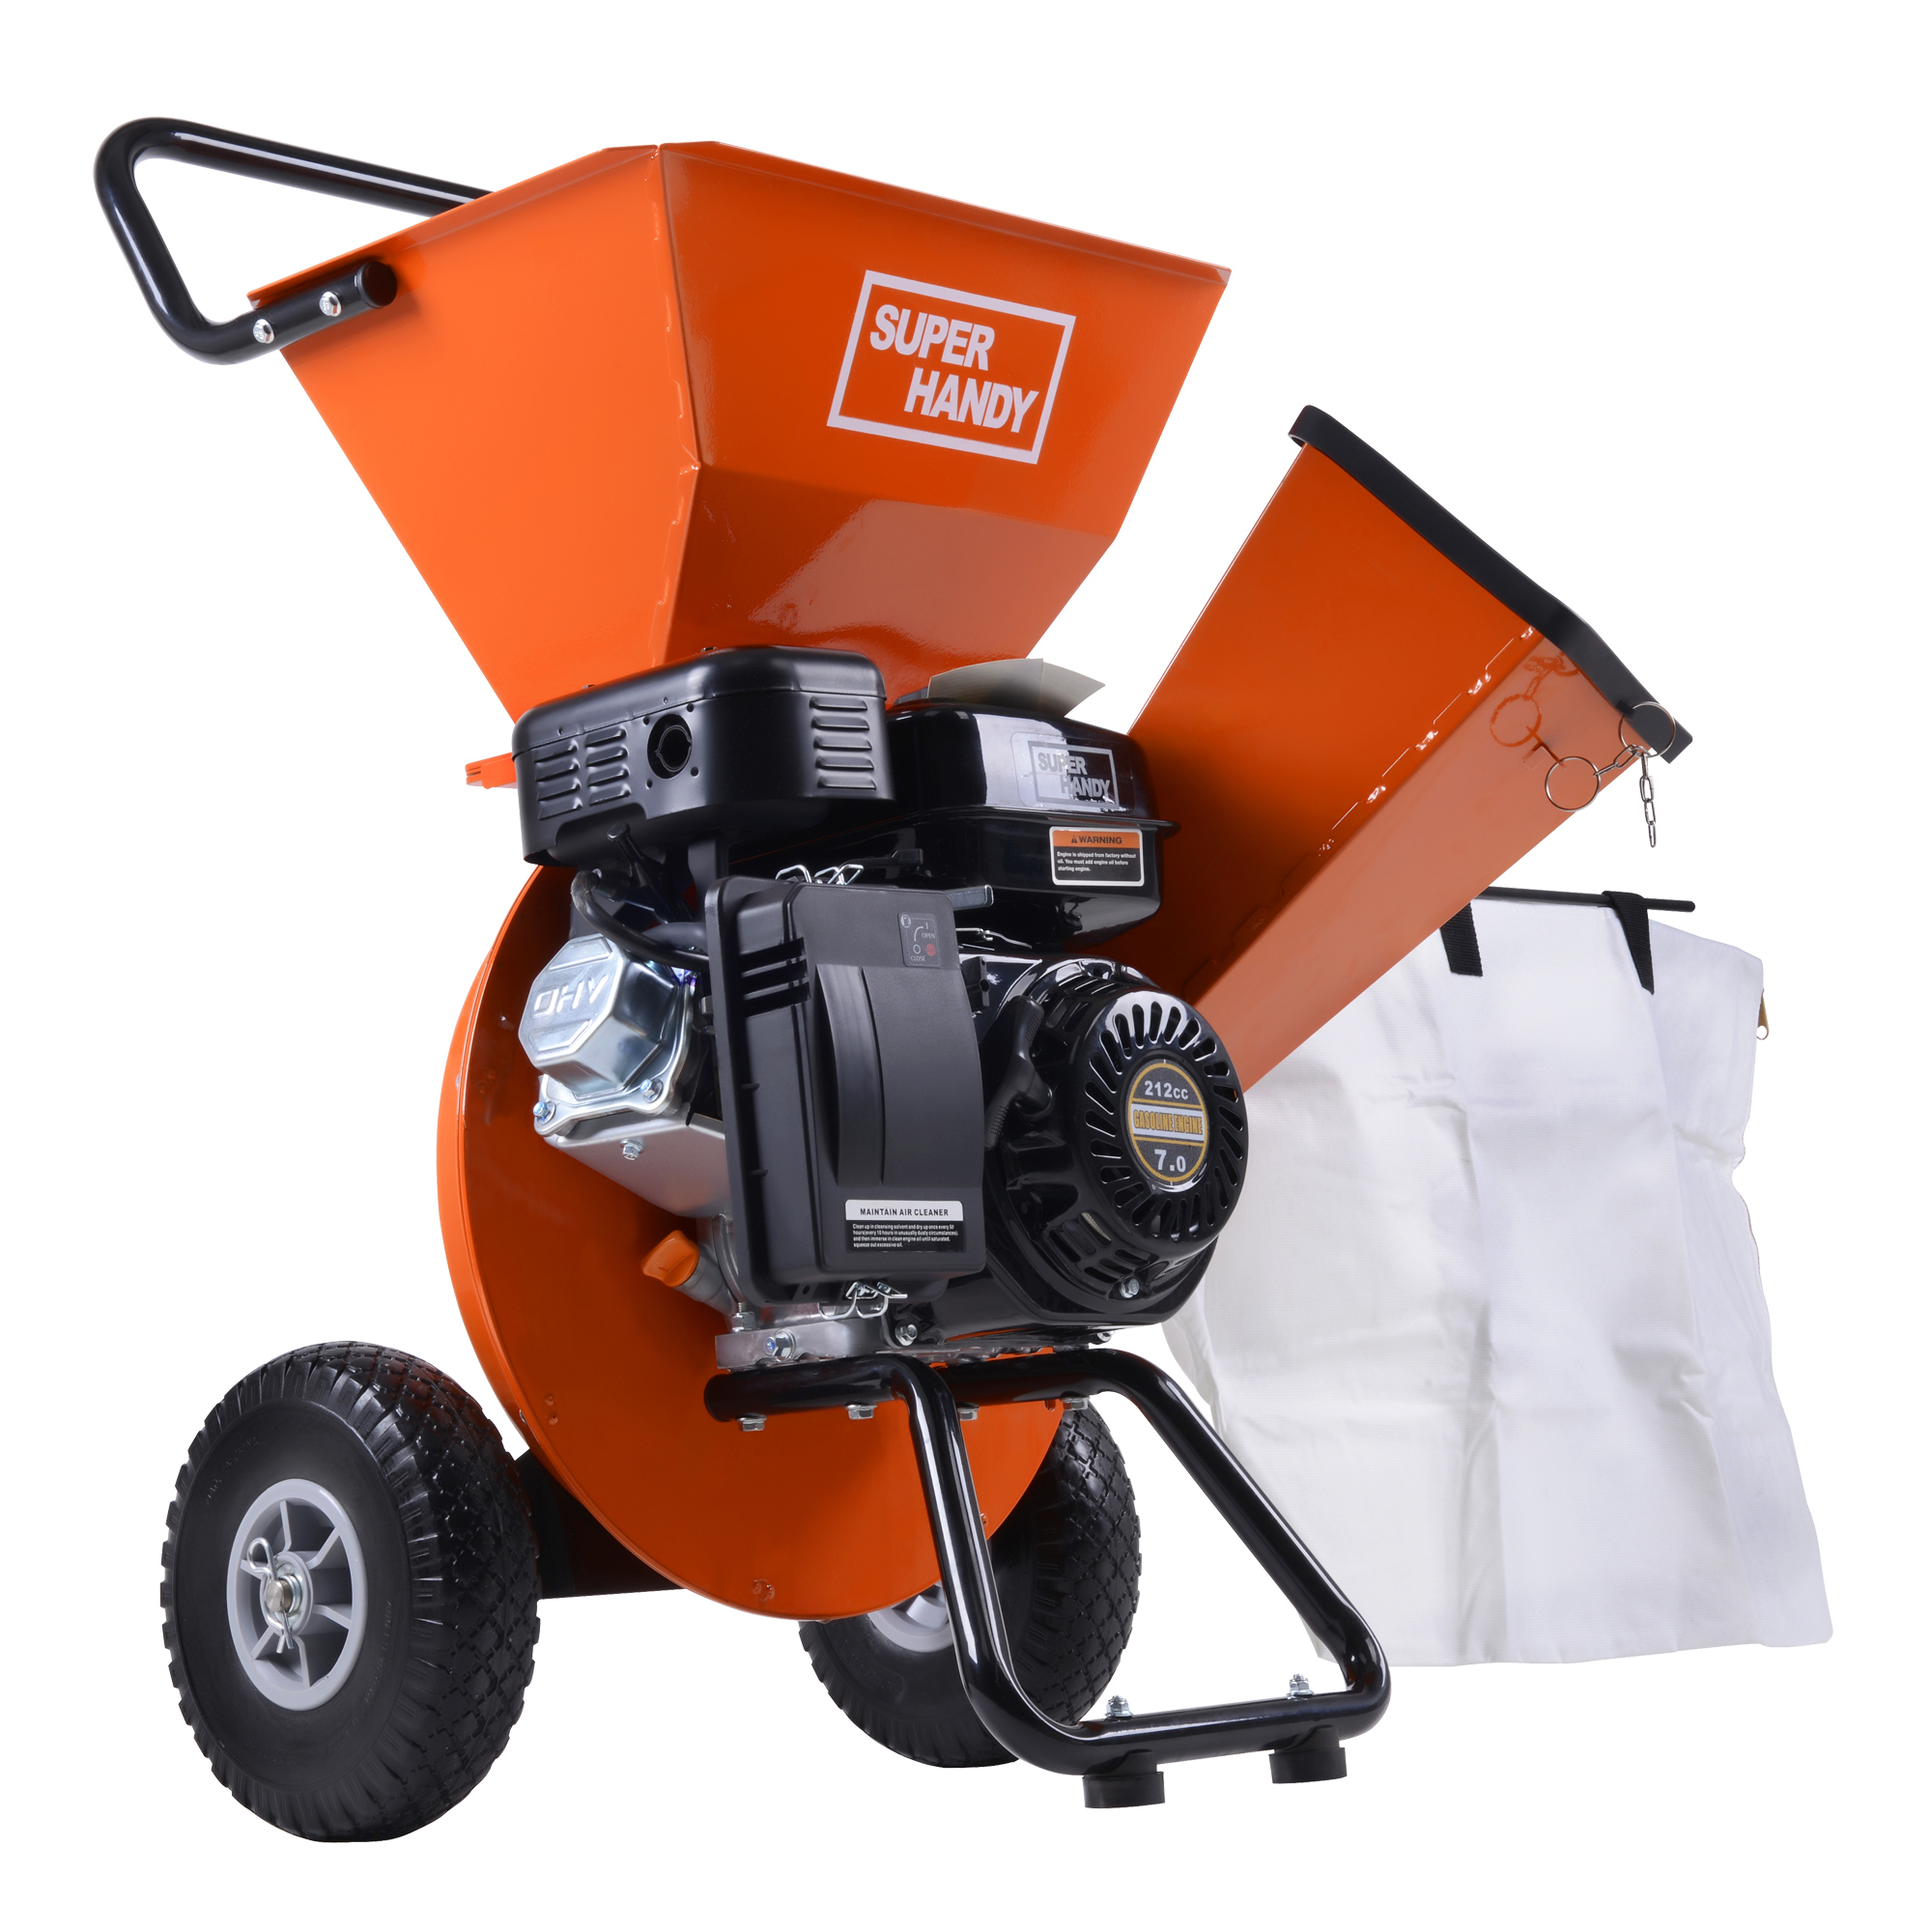 3Inch1 Wood Chipper, Engine Displacement 212 cc, Horsepower 7 Max. Cutting Thickness 3 in, Model - SuperHandy TRI-GUO019